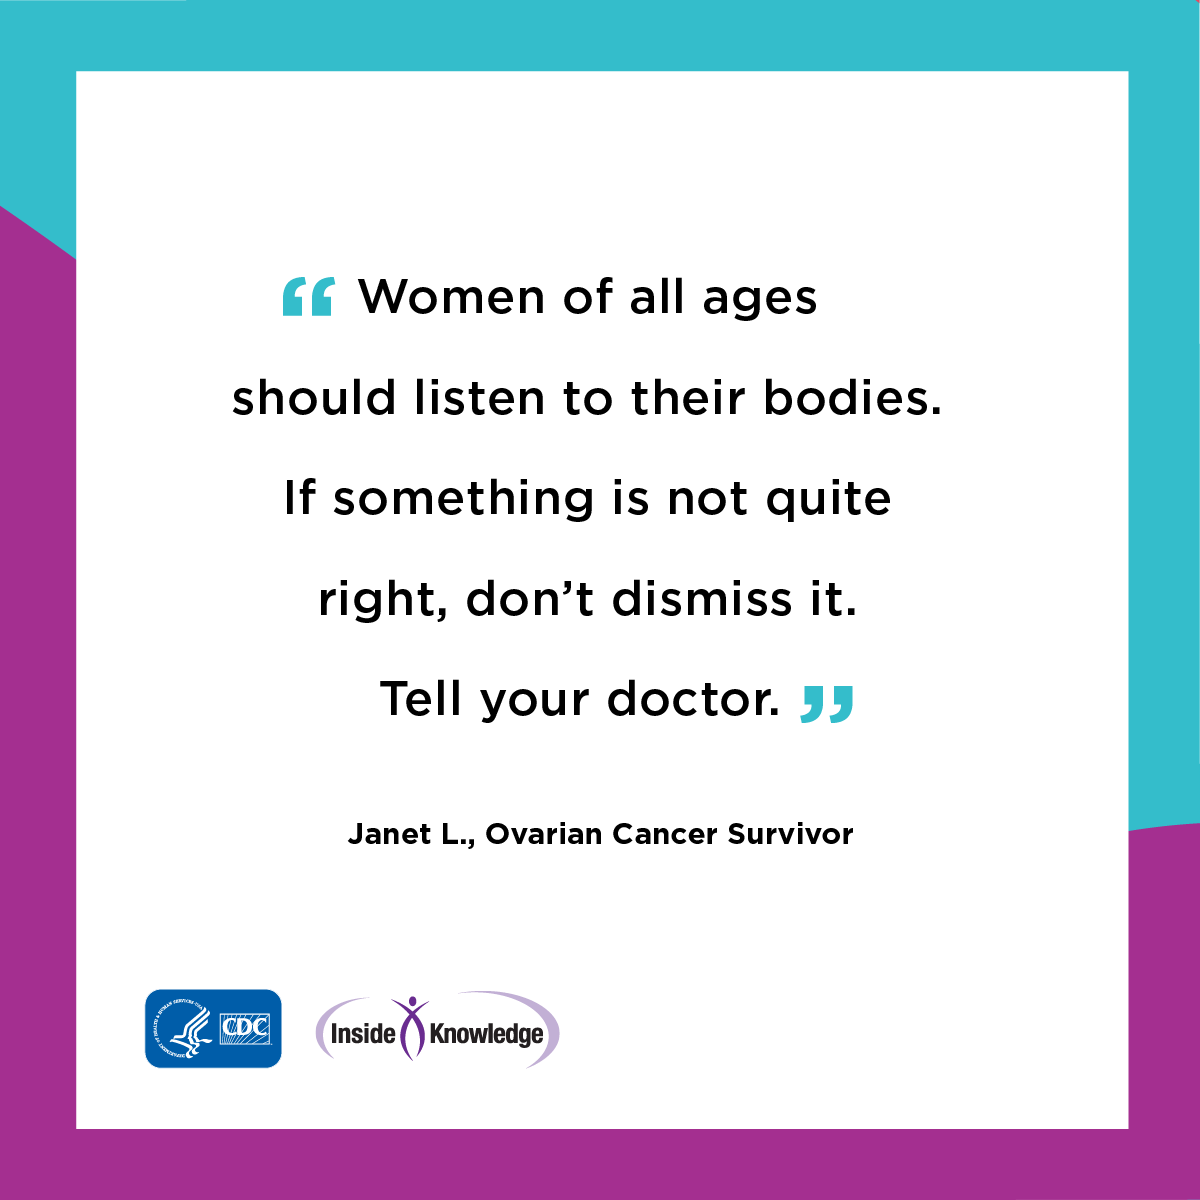 Women of all ages is to listen to your body. If something is not quite right, don’t dismiss it. Tell your doctor.